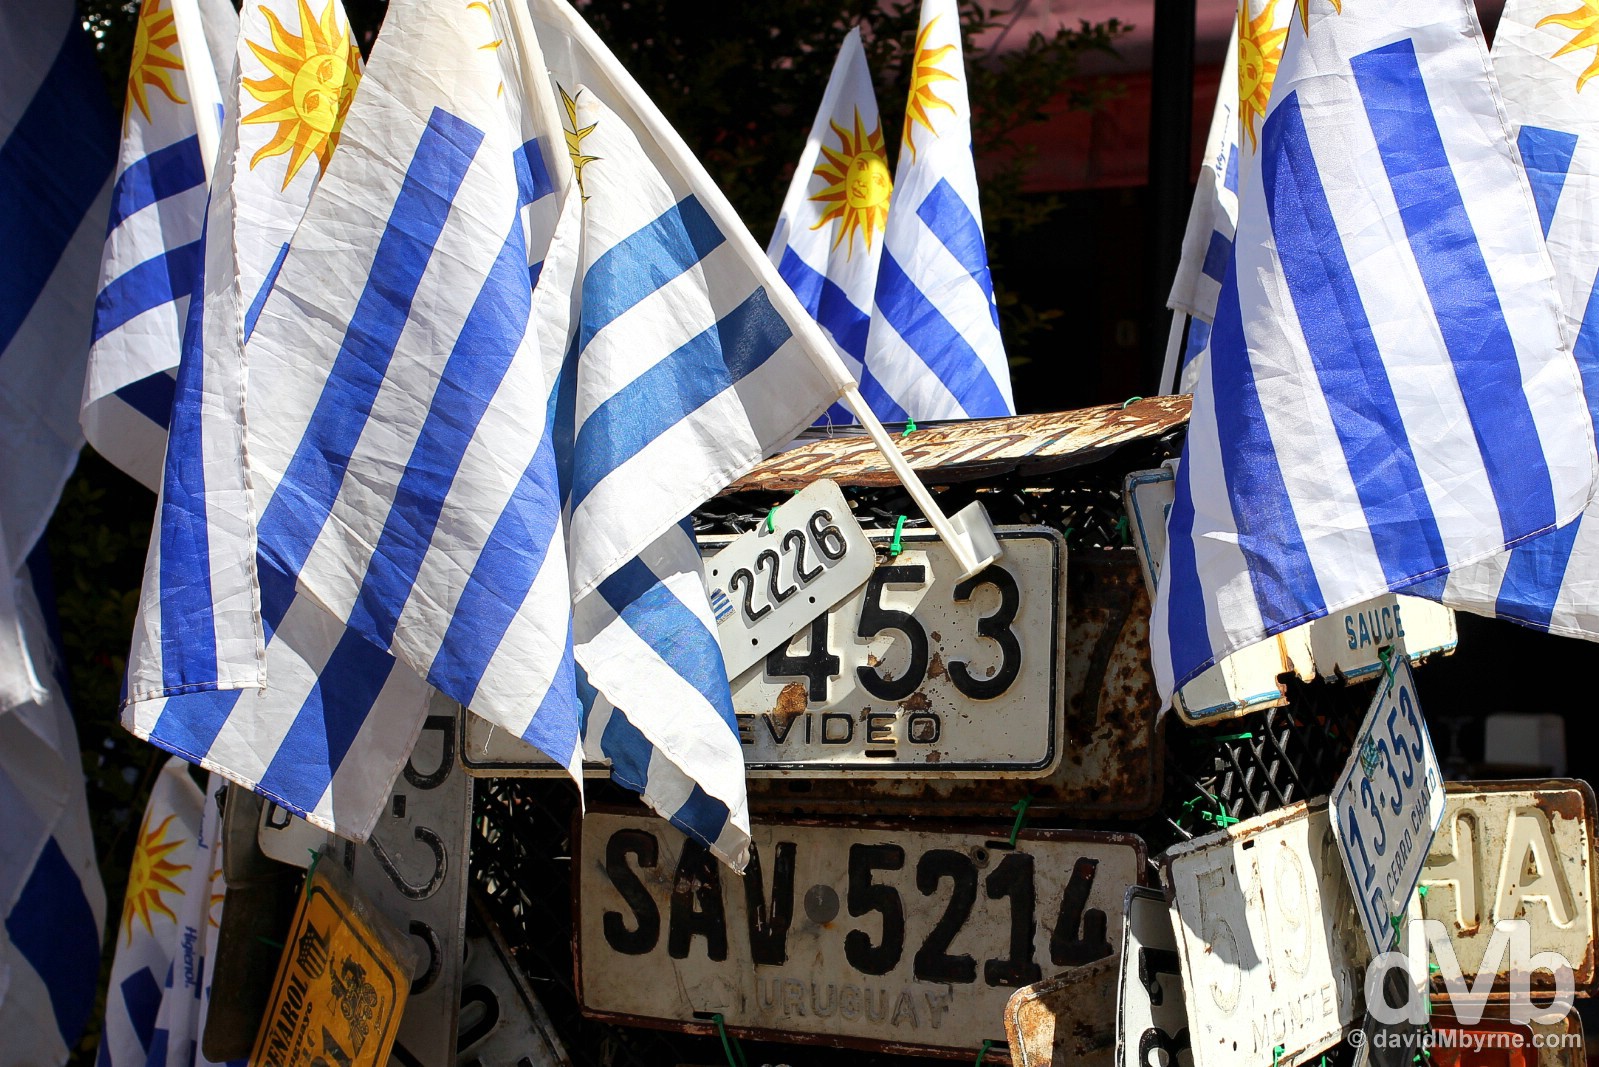 Flags on the streets of Montevideo, Uruguay. September 18, 2015.